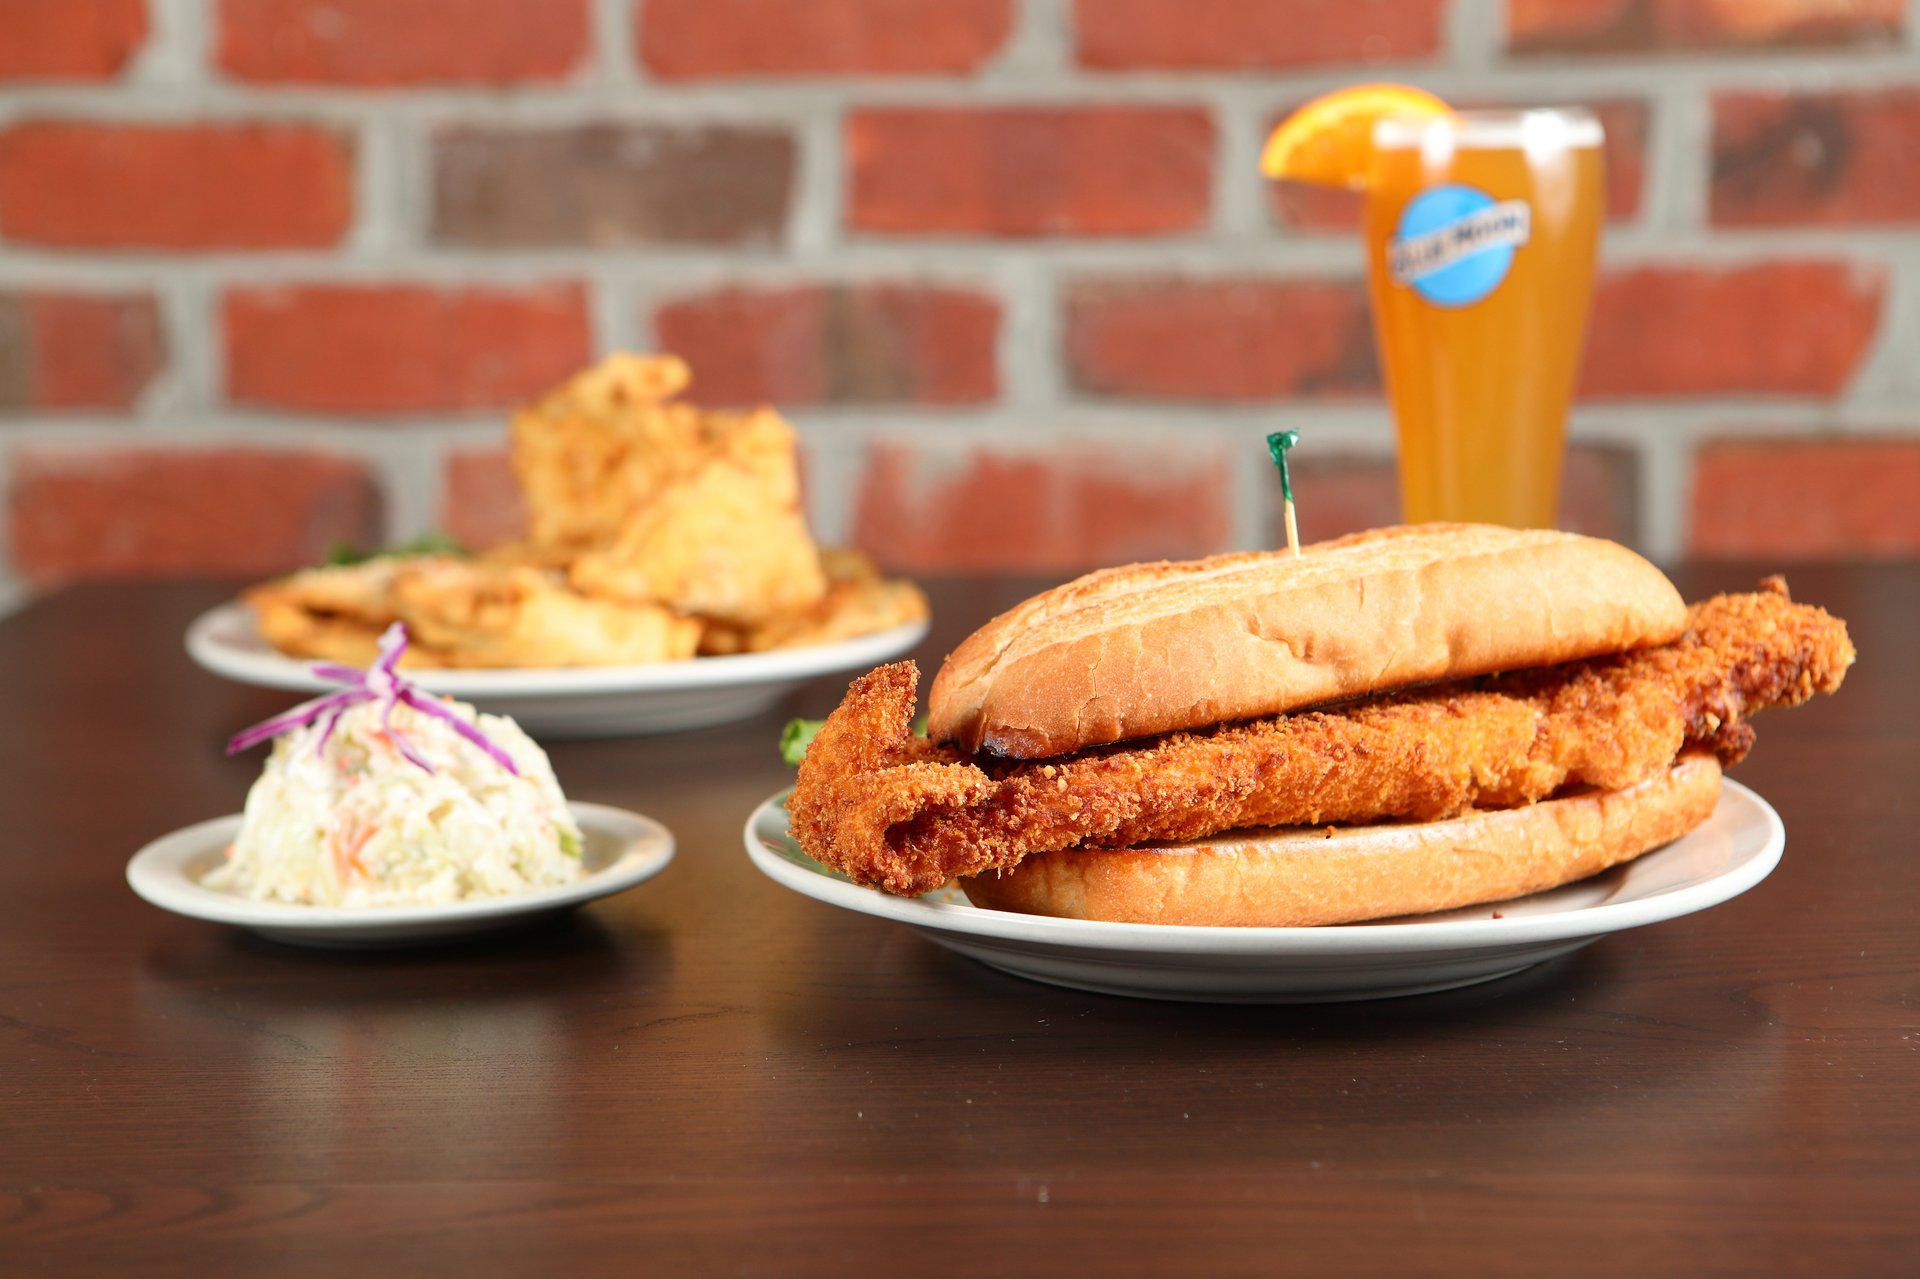 A photo from Sieb's Pub of a fish sandwich, side of coleslaw, another entrée item, and a Blue Moon in a glass.